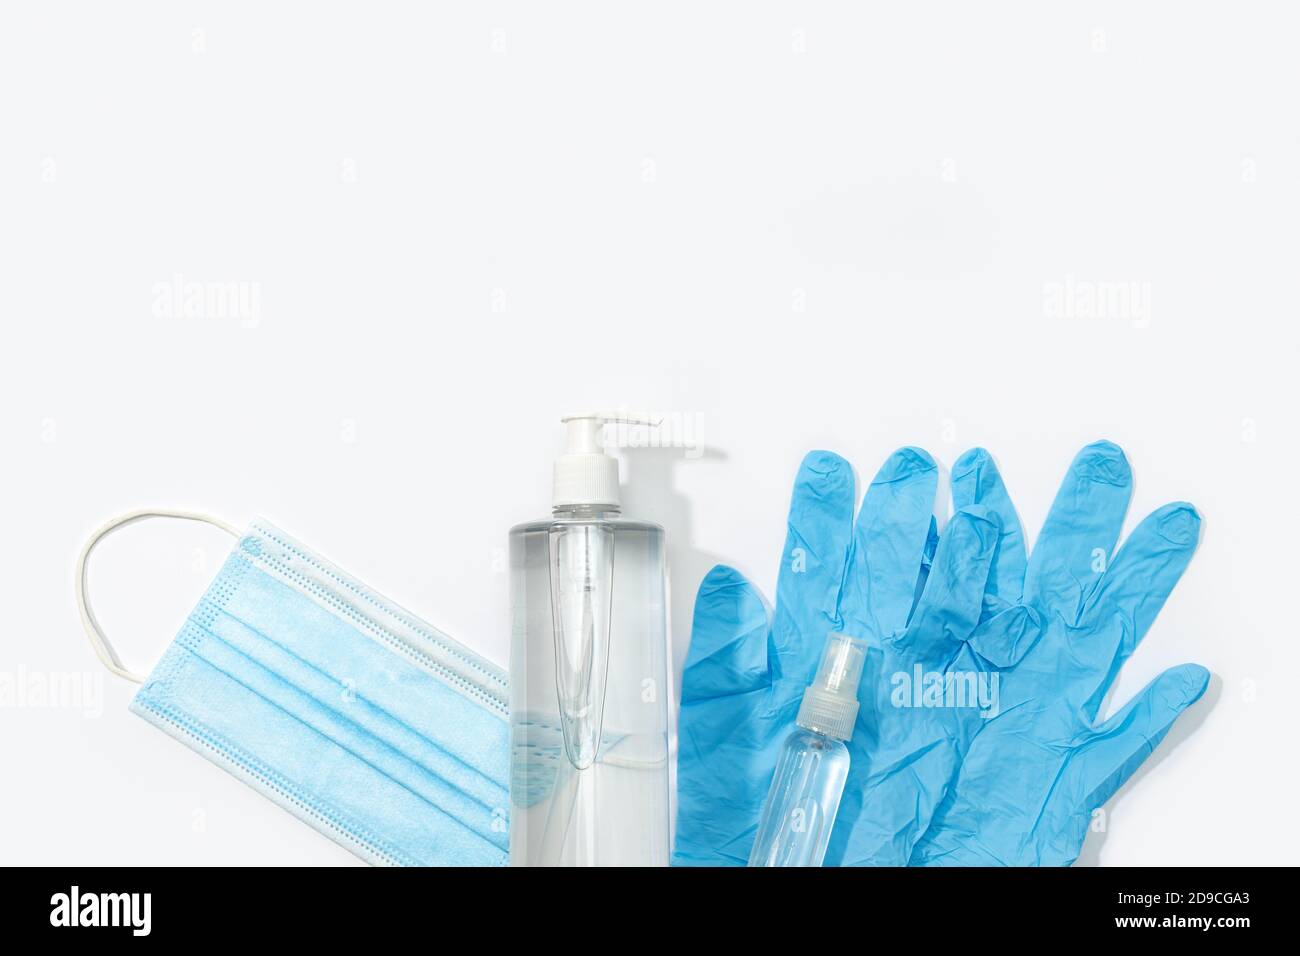 Covid-19 coronavirus protection or prevention concept. Medical face mask, gloves, hand sanitizer and disinfectant spray on white background. Top view. Stock Photo